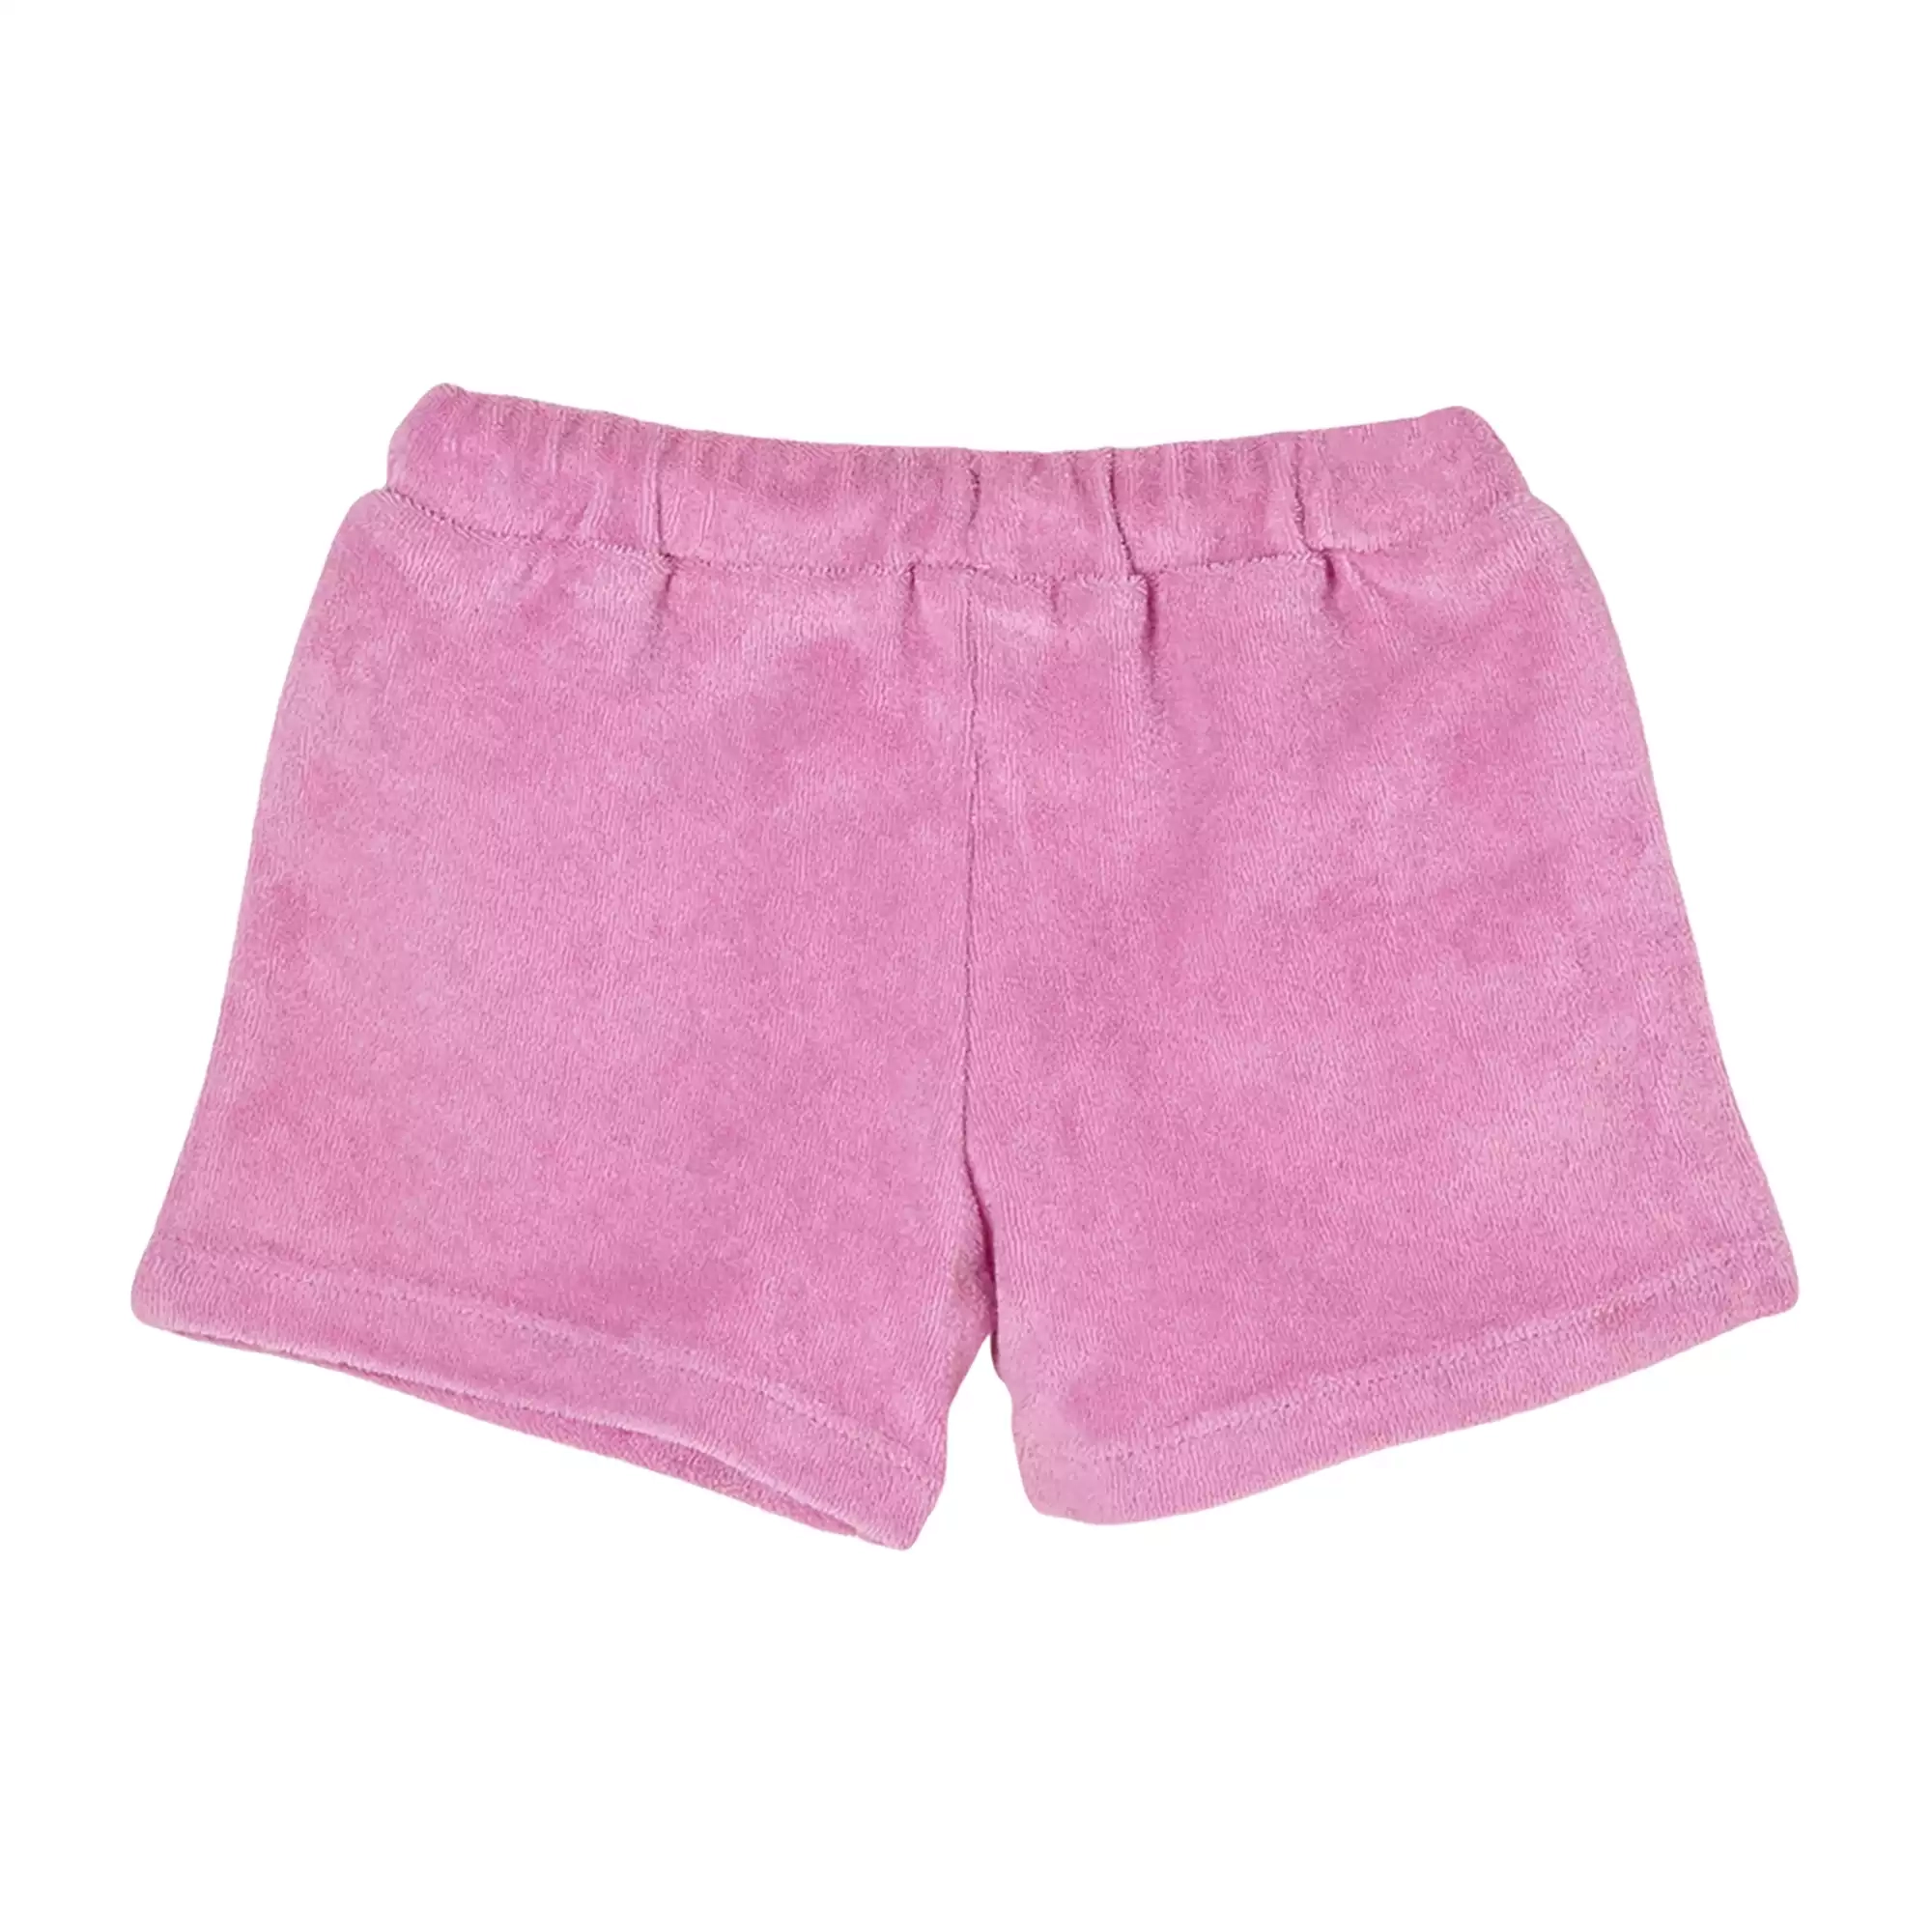 Frottee Shorts s.Oliver Pink M2000582542507 2